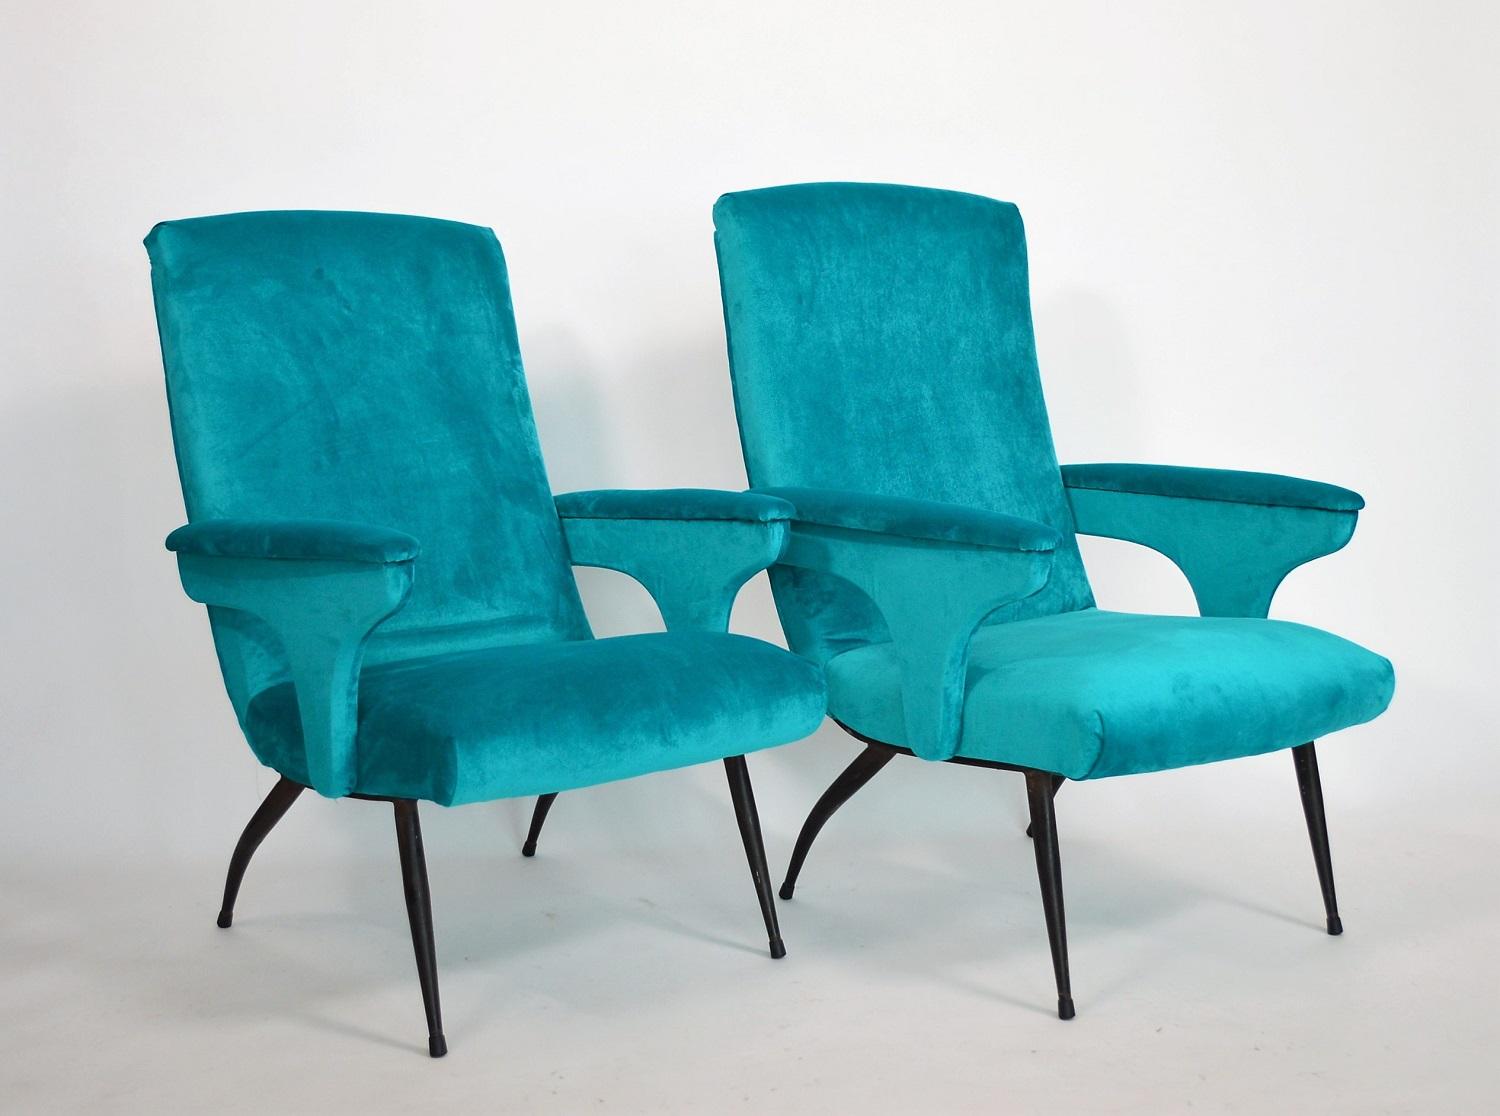 Crazy pair of two Italian original armchairs or lounge chairs from the 1950s with metal feet.
Completely restored internally with quality material and outside reupholstered with shiny petrol blue Italian velvet.
Original metal feet with rubber